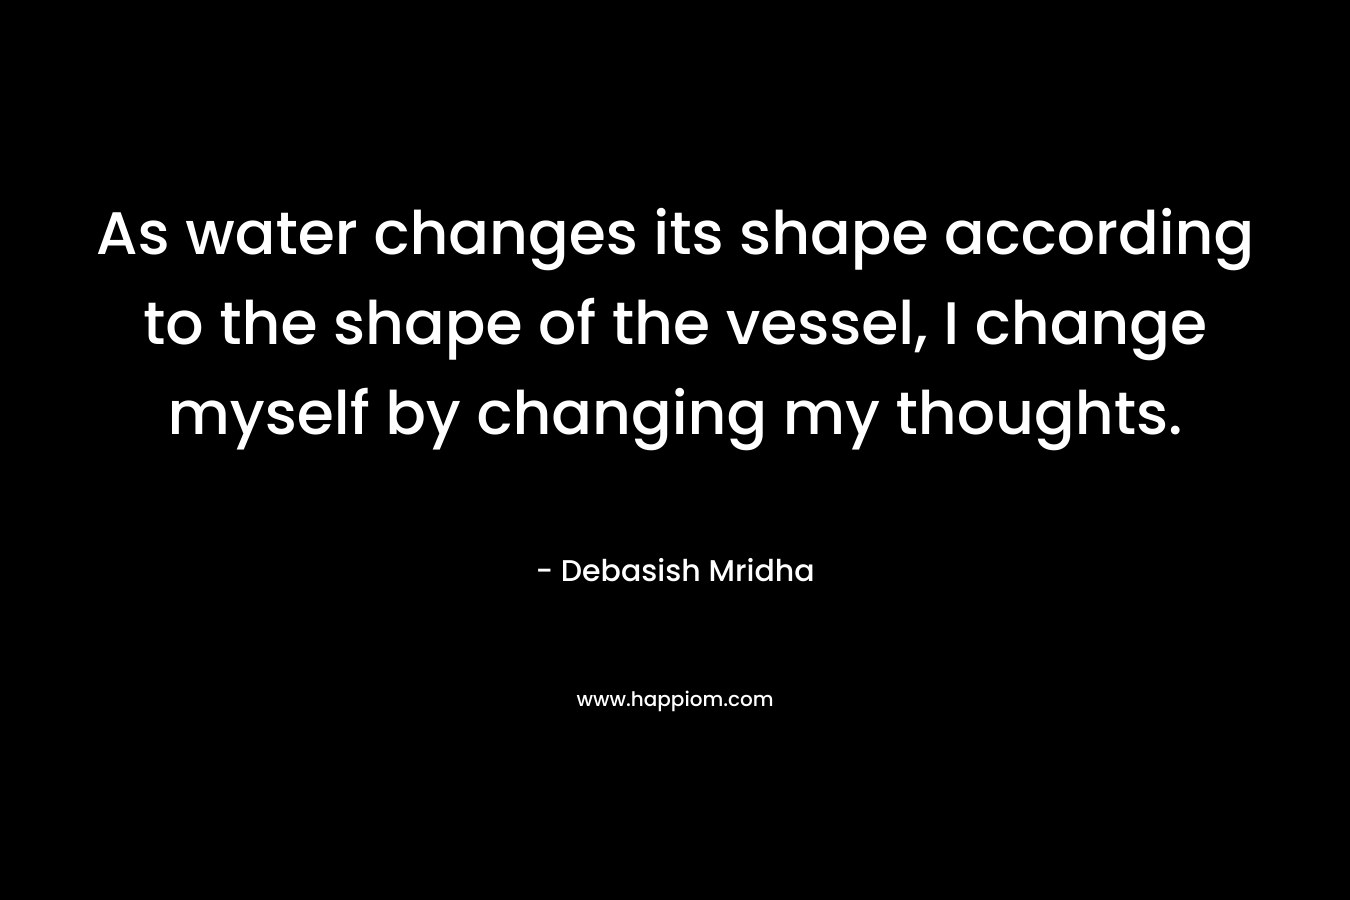 As water changes its shape according to the shape of the vessel, I change myself by changing my thoughts.